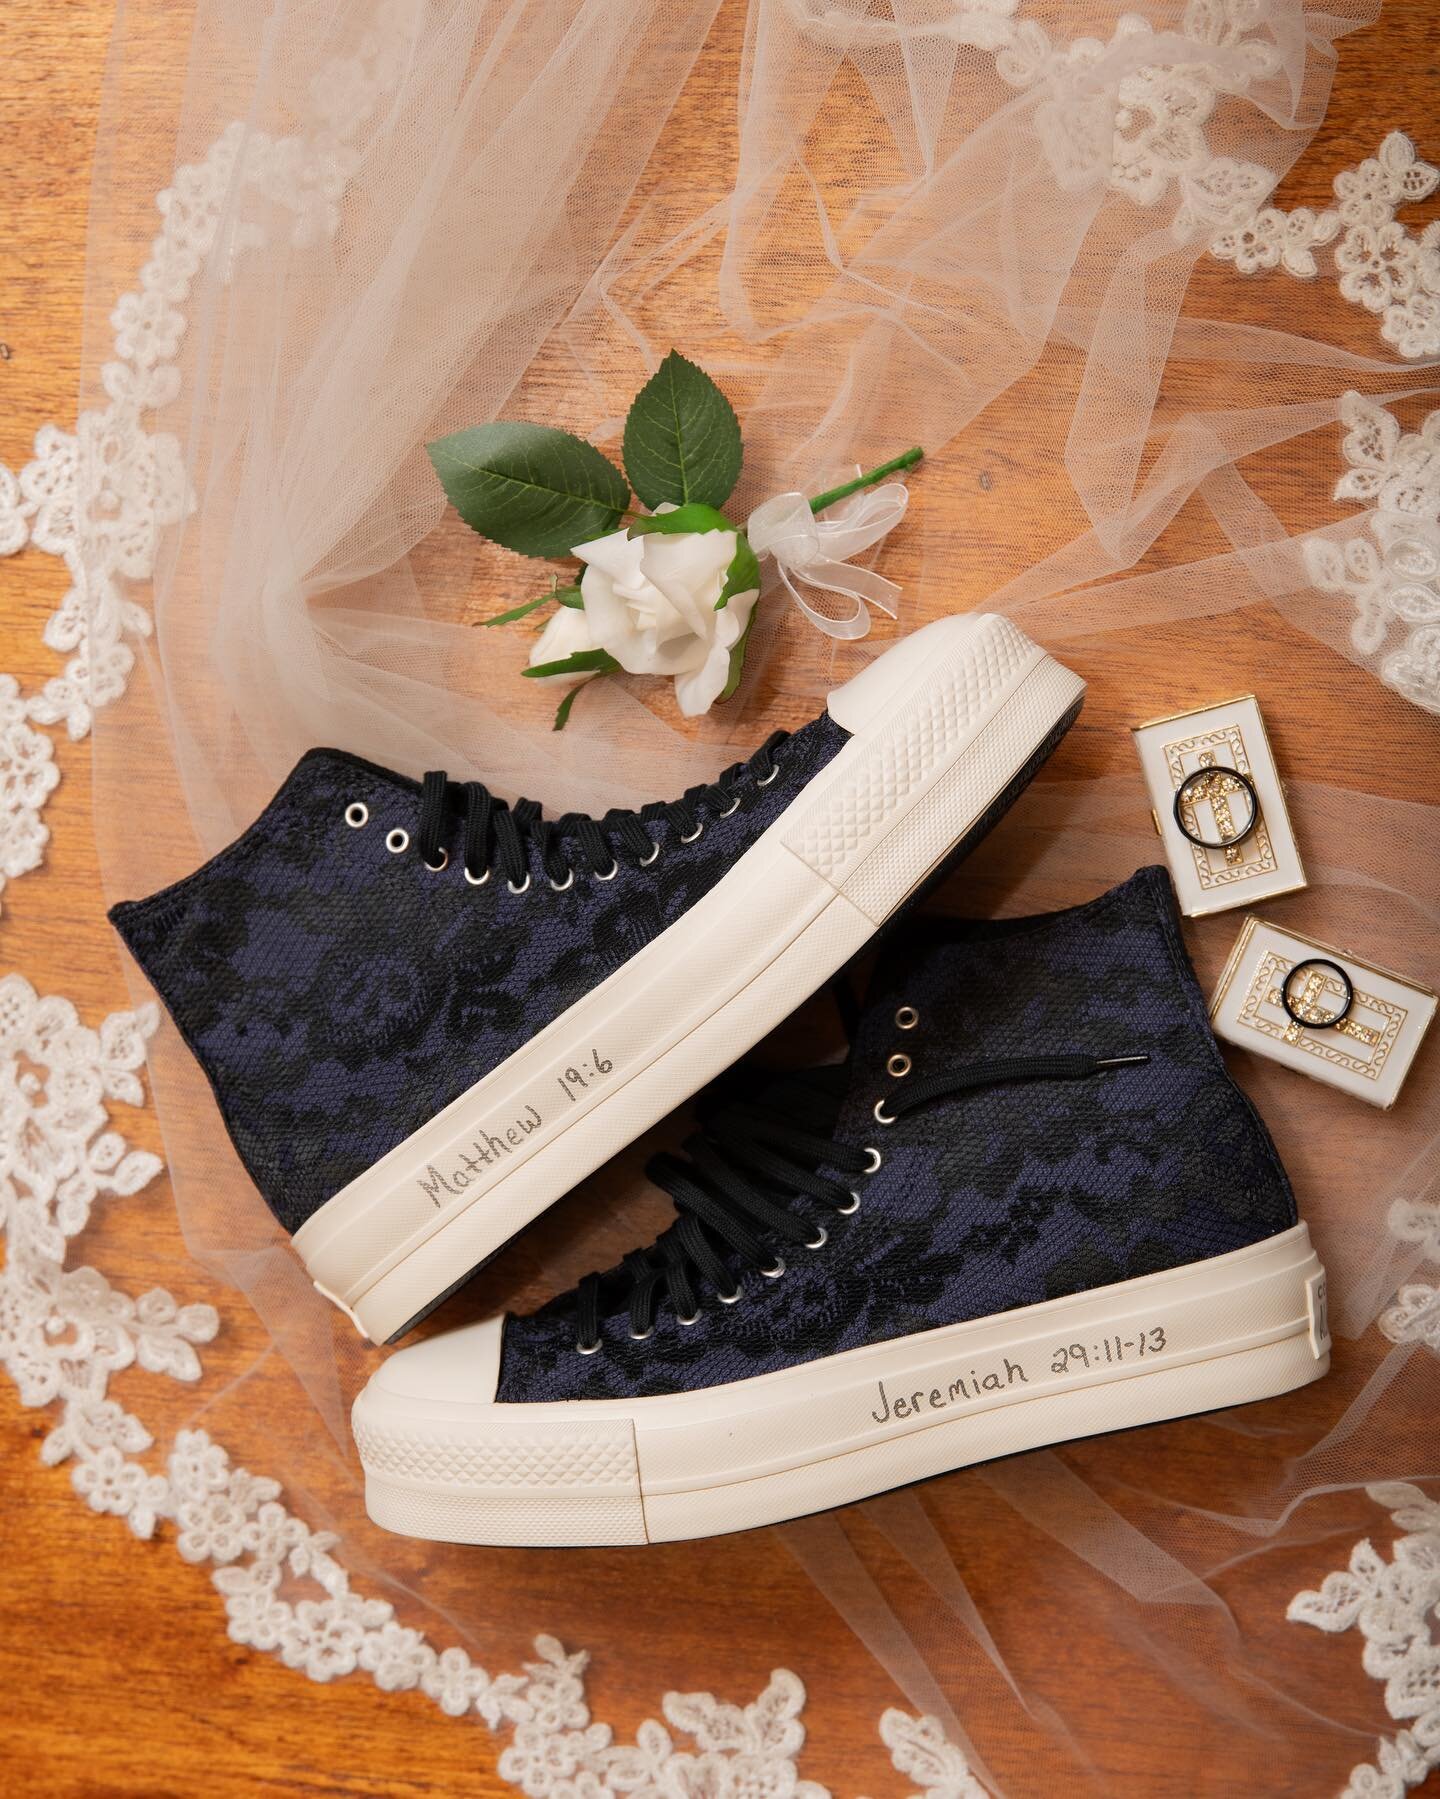 These are the coolest chucks I&rsquo;ve ever seen! #converse #weddingshoesideas